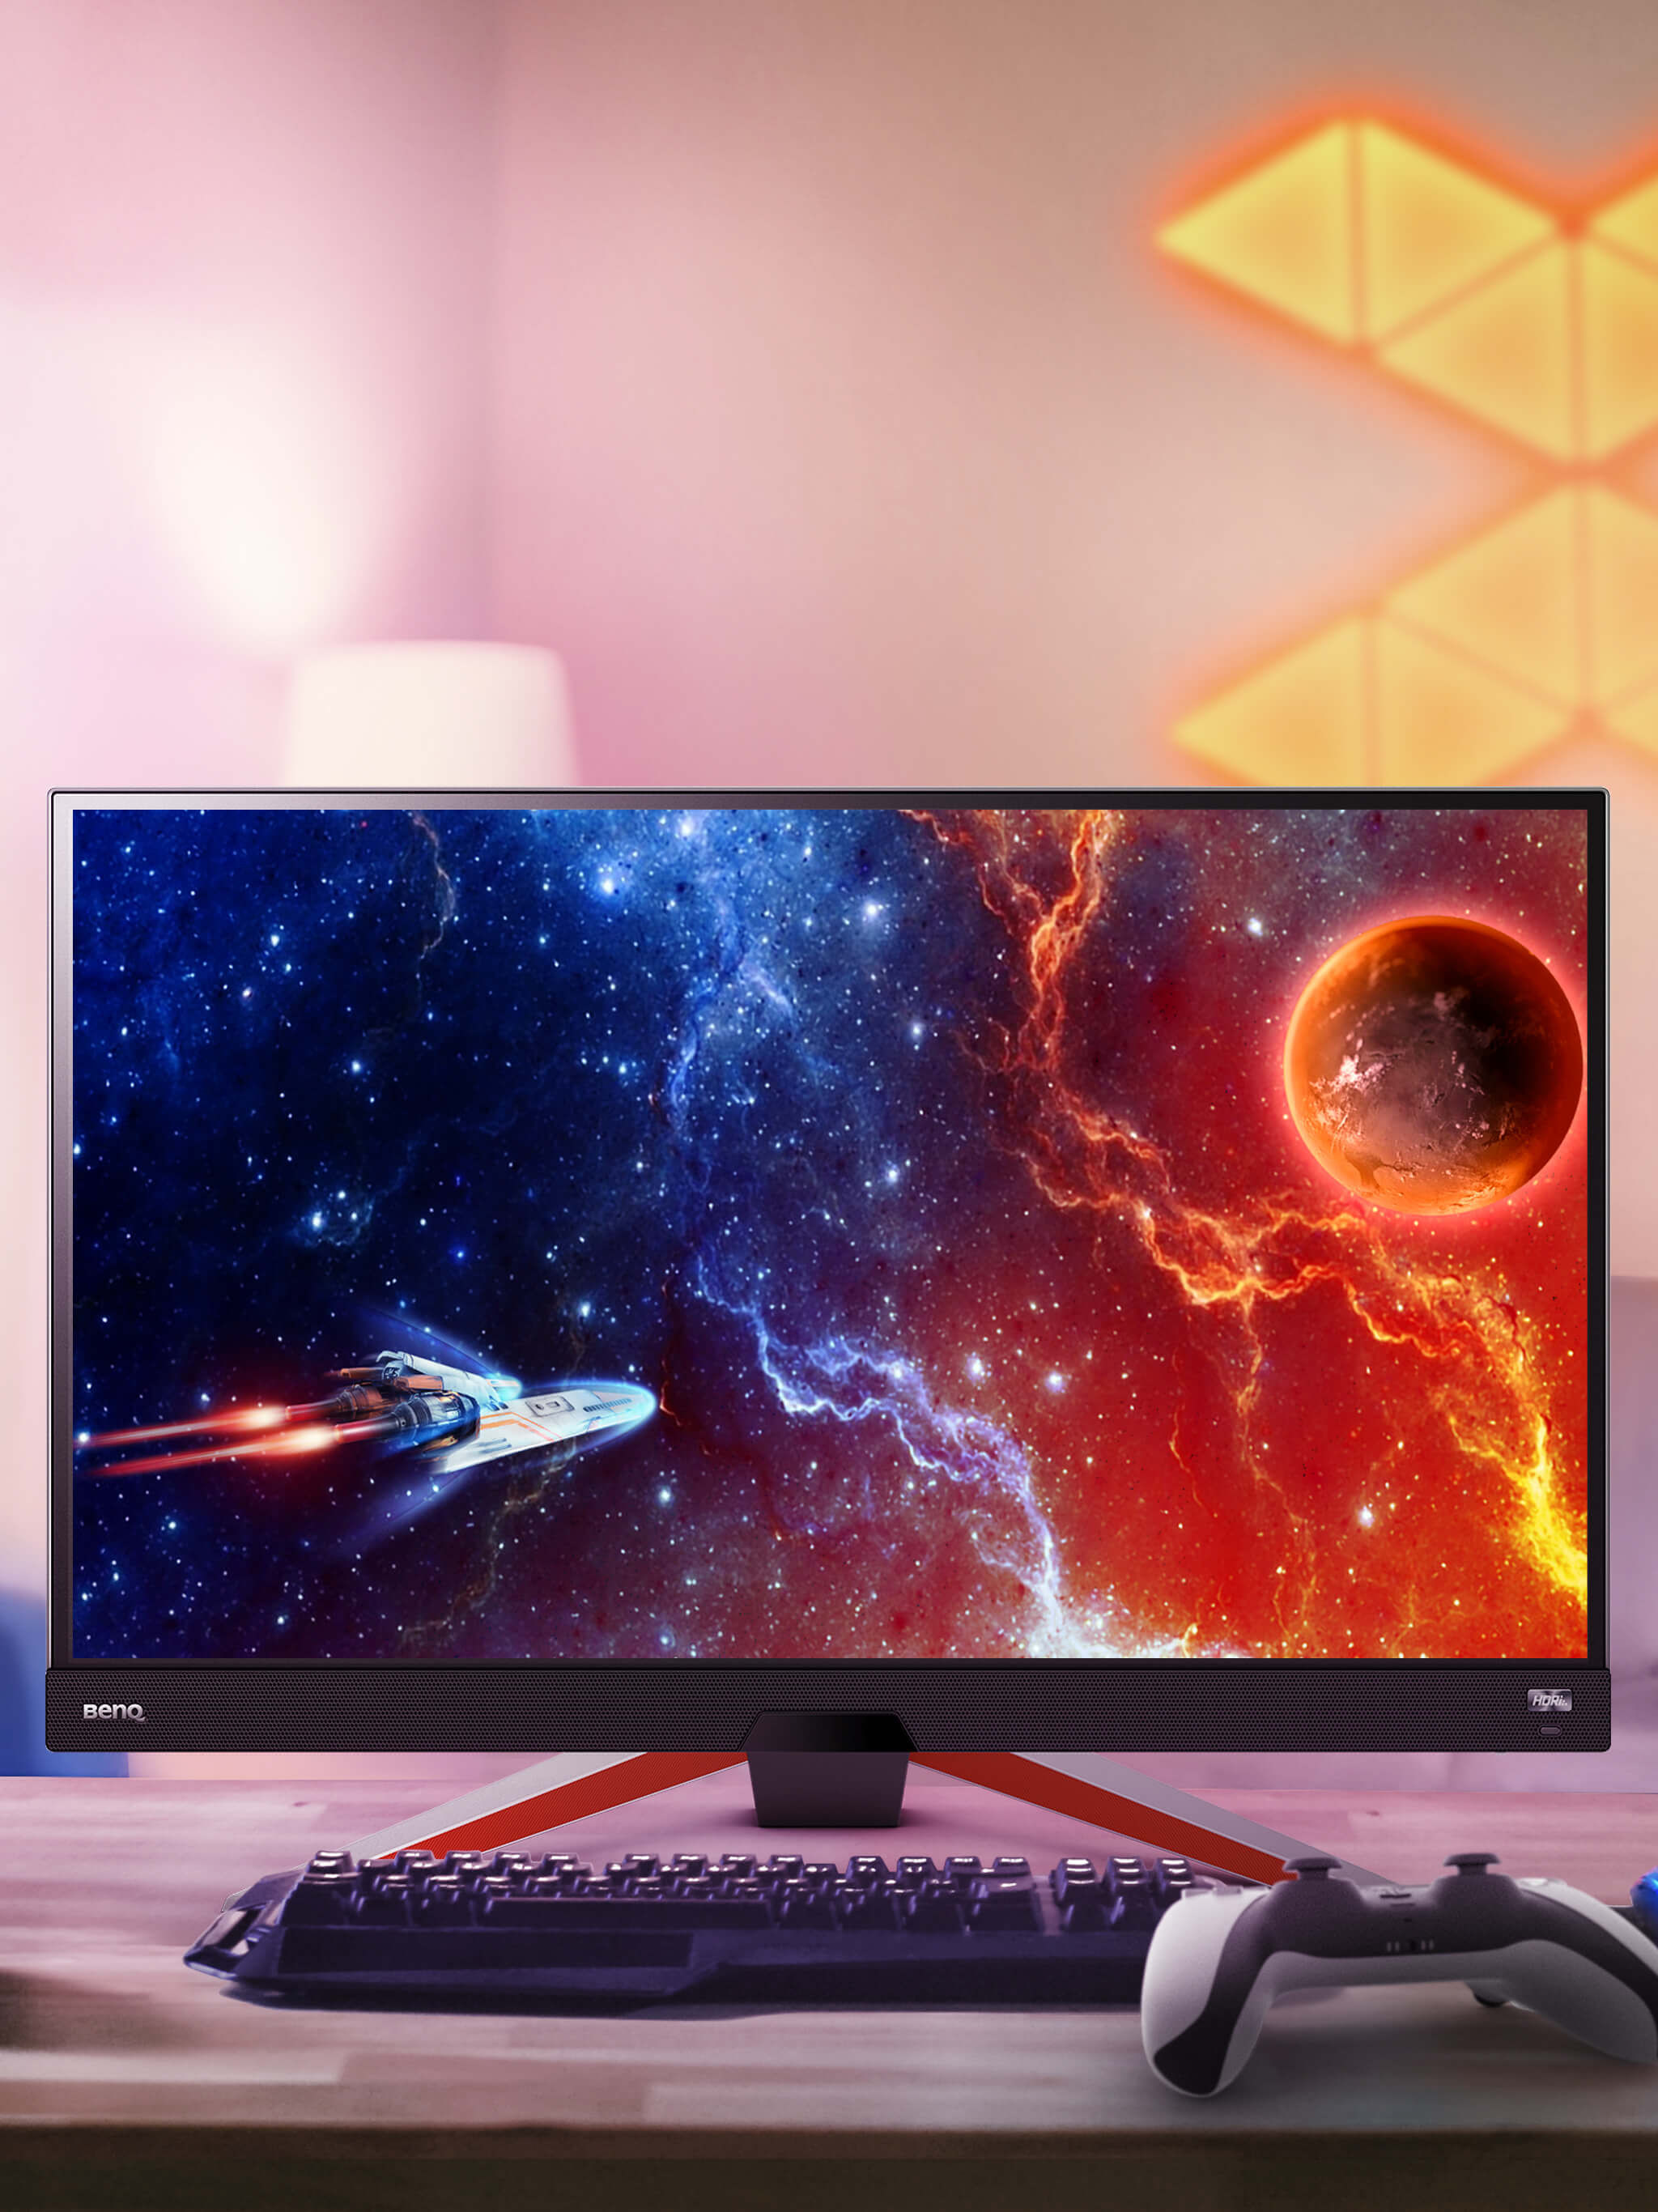 Reviews of ex240 monitor